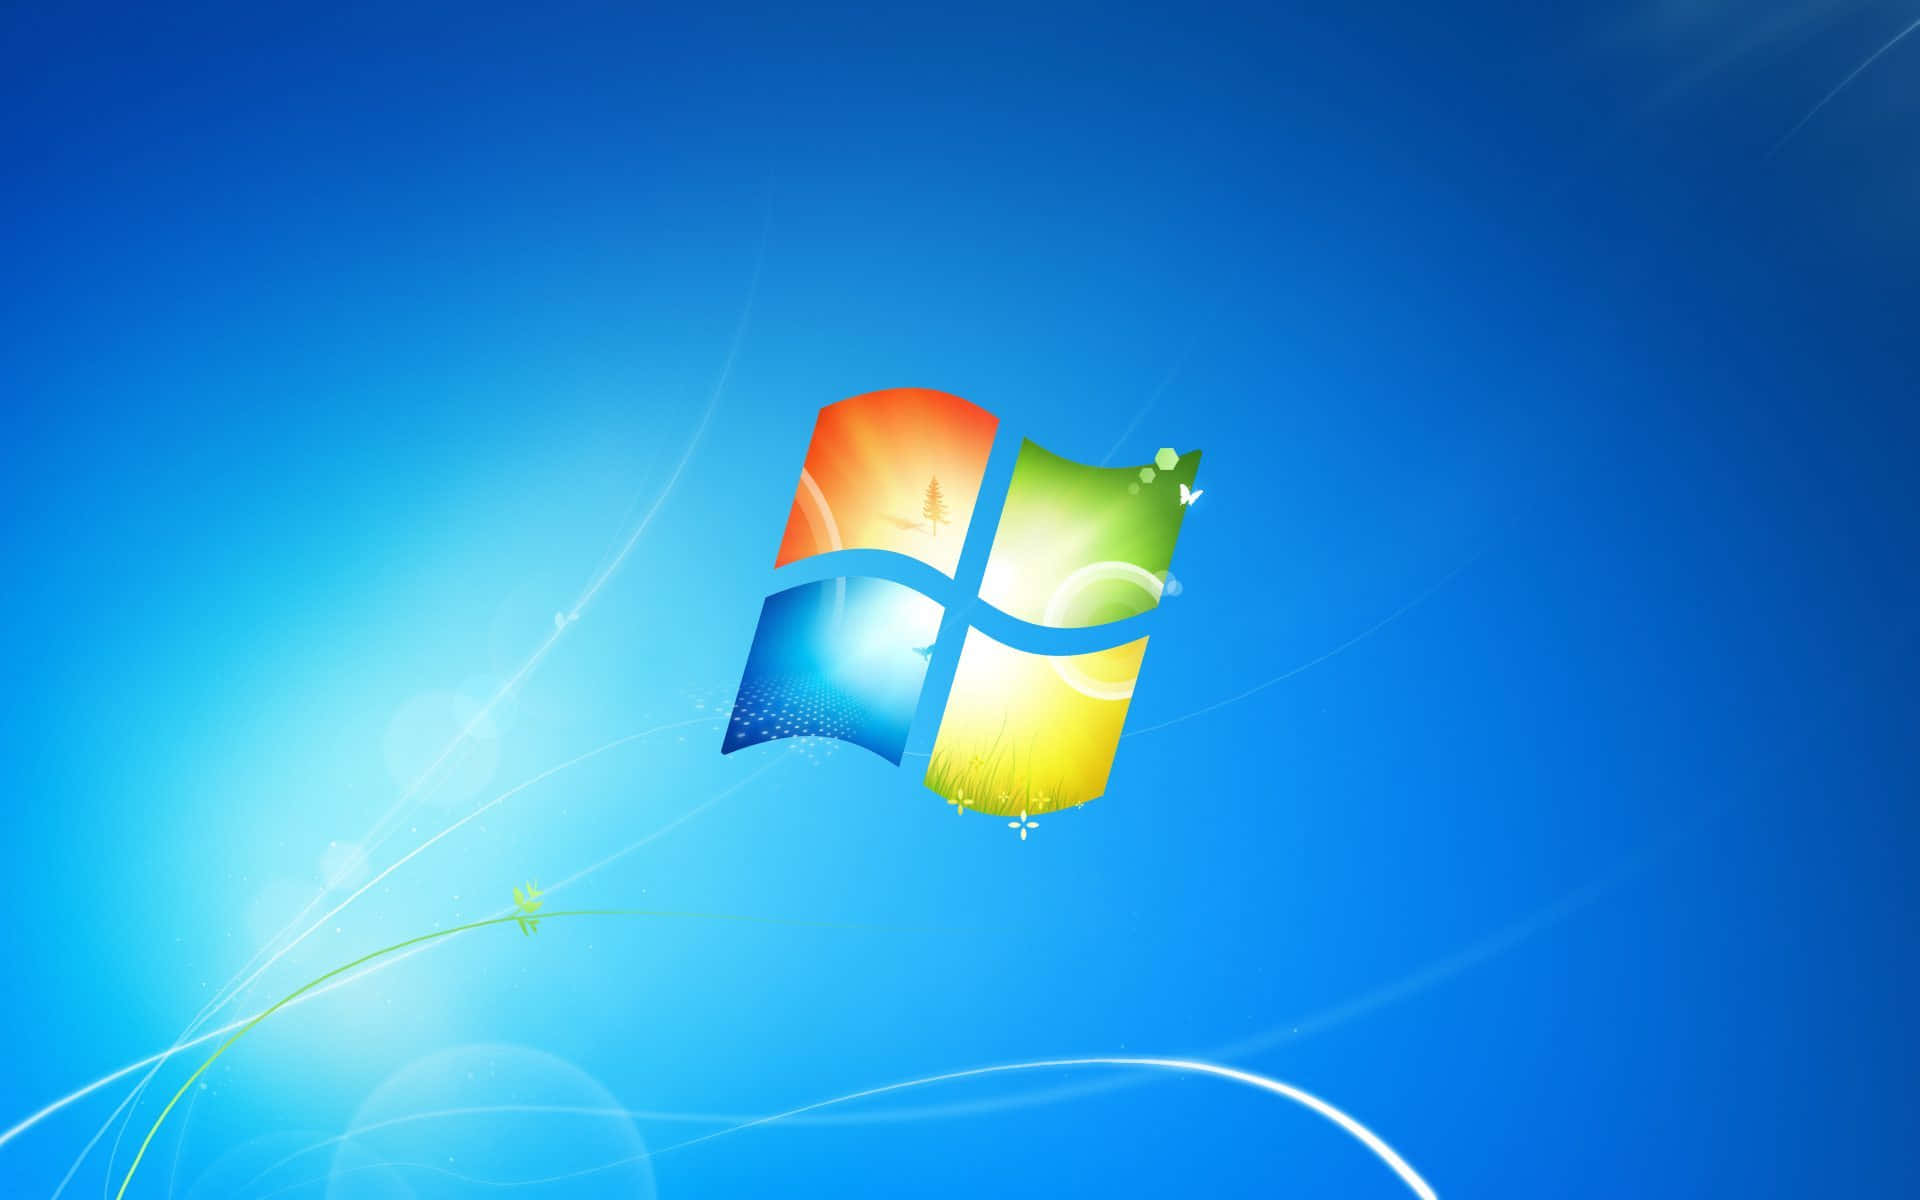 Windows 7 - Installing Updates, Working Across Multiple Devices